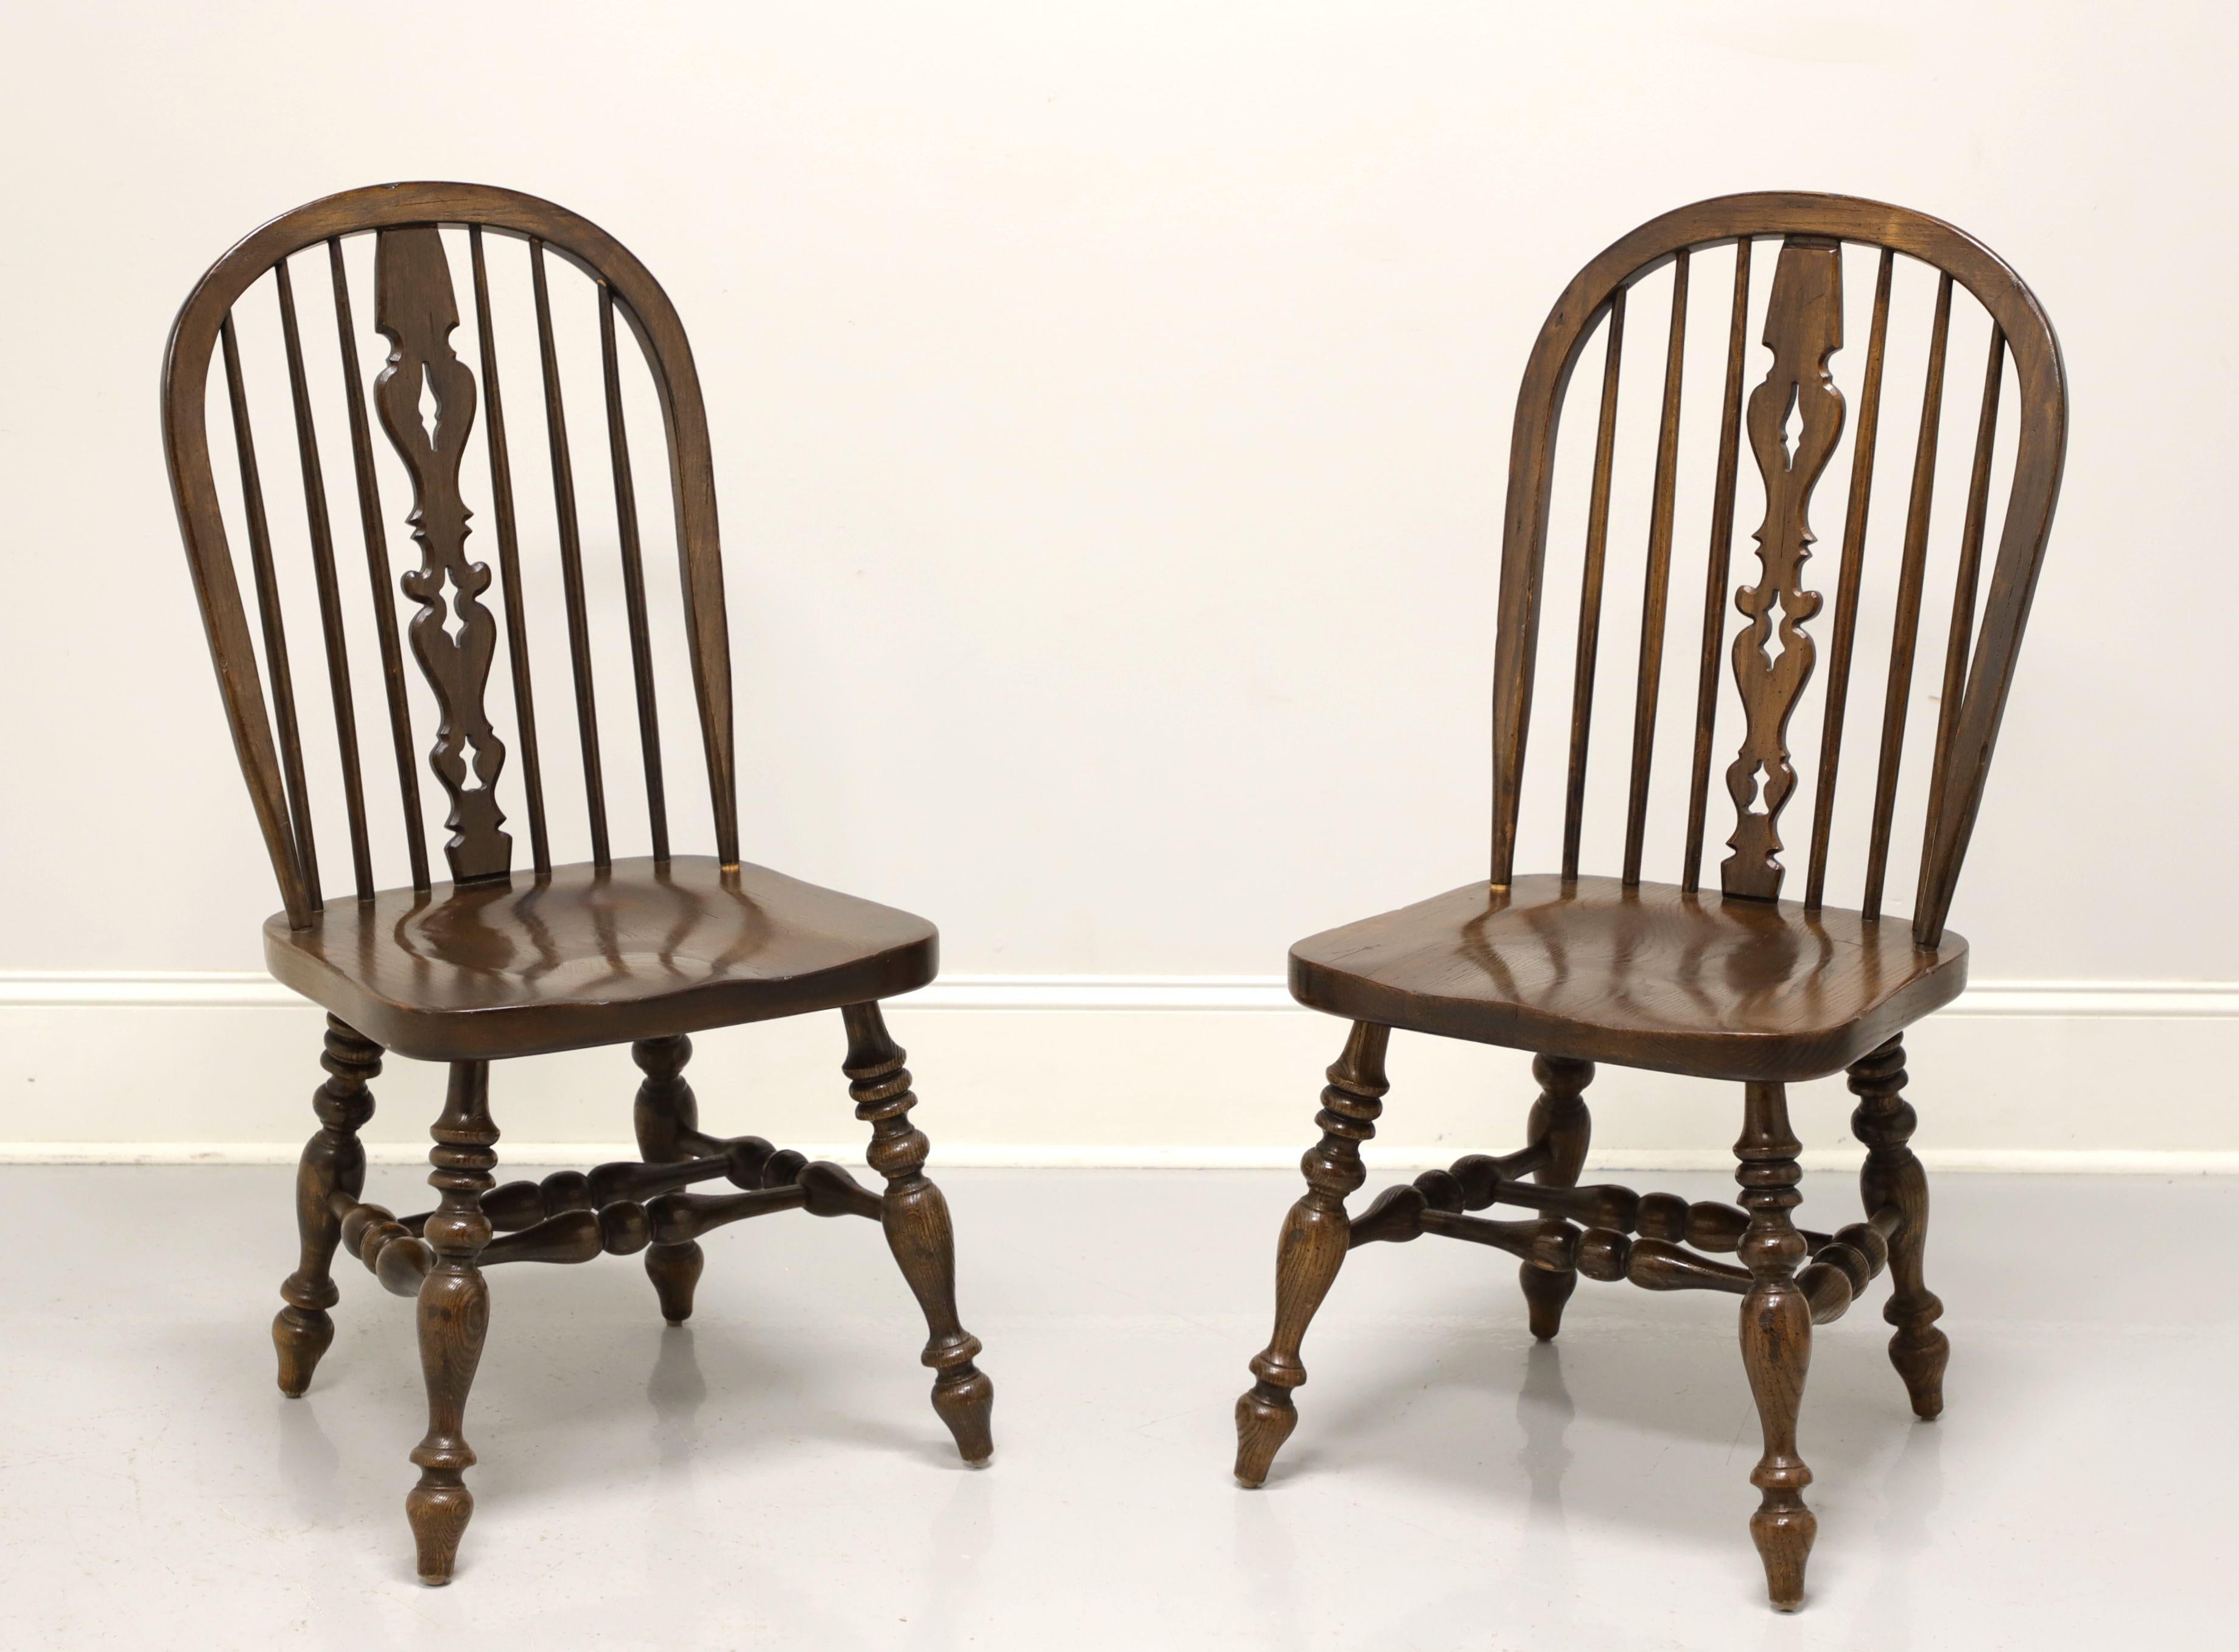 ETHAN ALLEN Royal Charter Oak Bowback Windsor Dining Side Chairs - Pair A 3